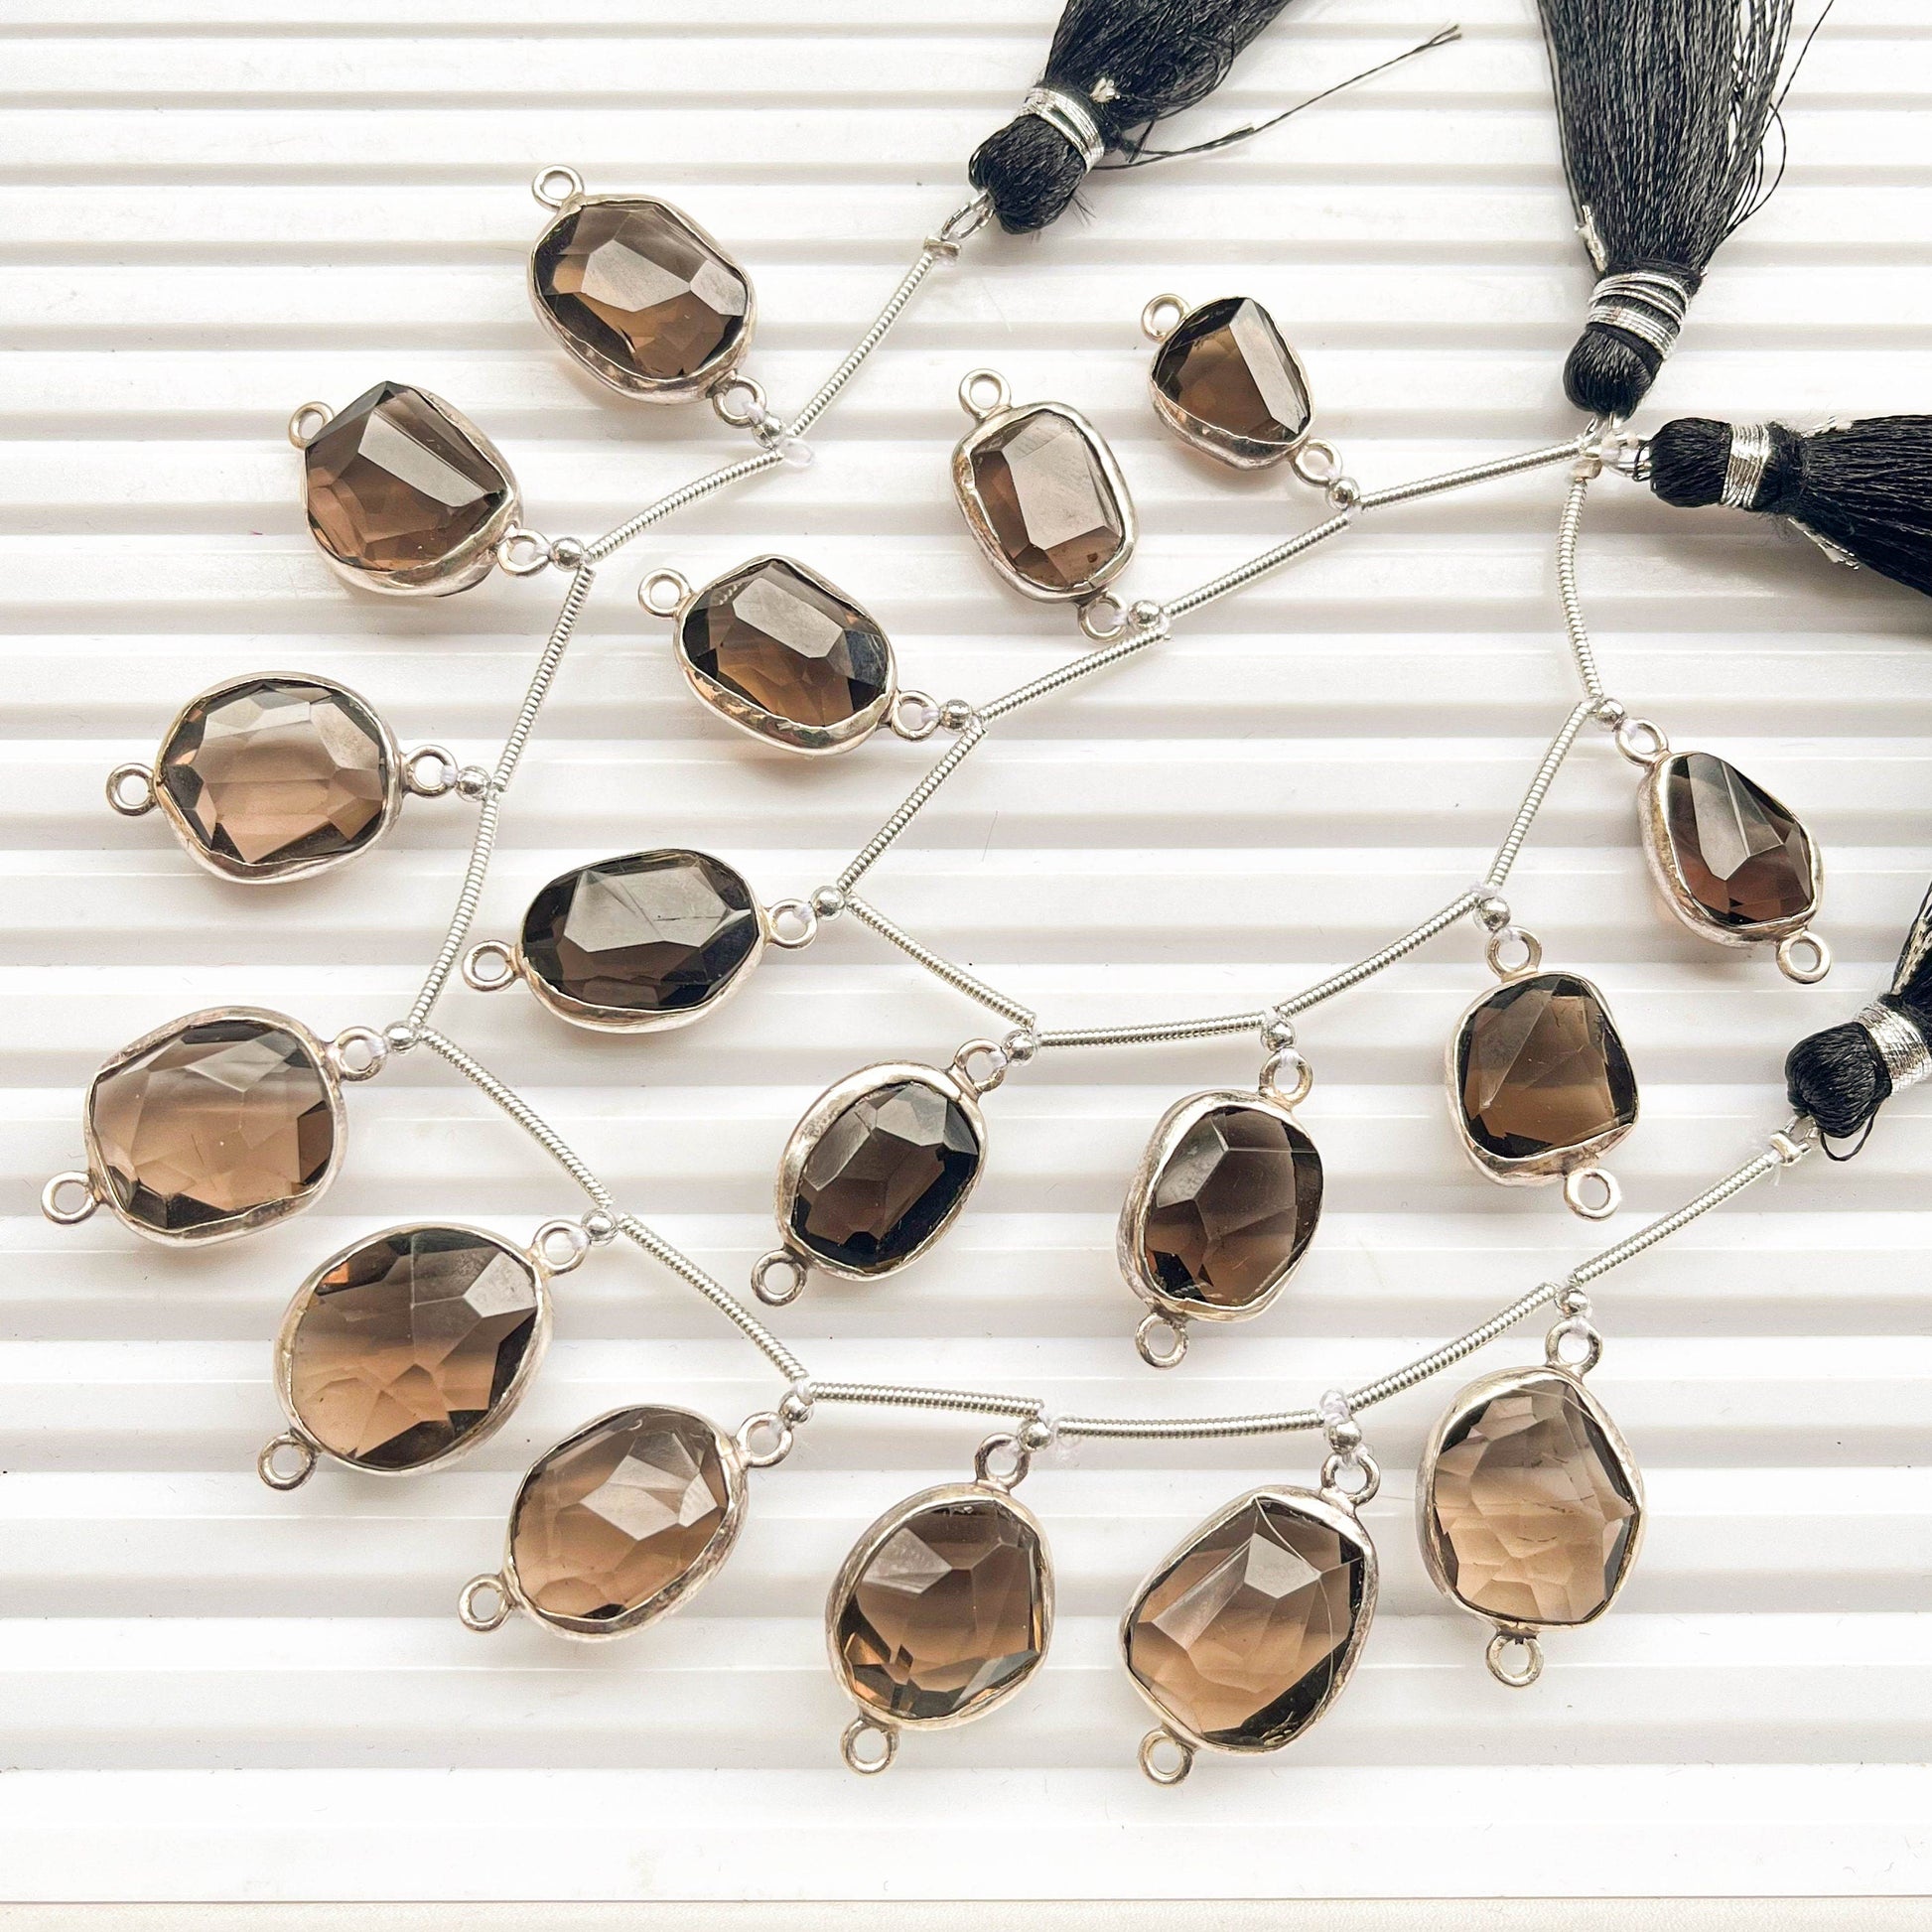 8 Pieces Smoky Quartz uneven faceted tumble 925 Silver bezel set Connectors for Jewelry making Beadsforyourjewelry